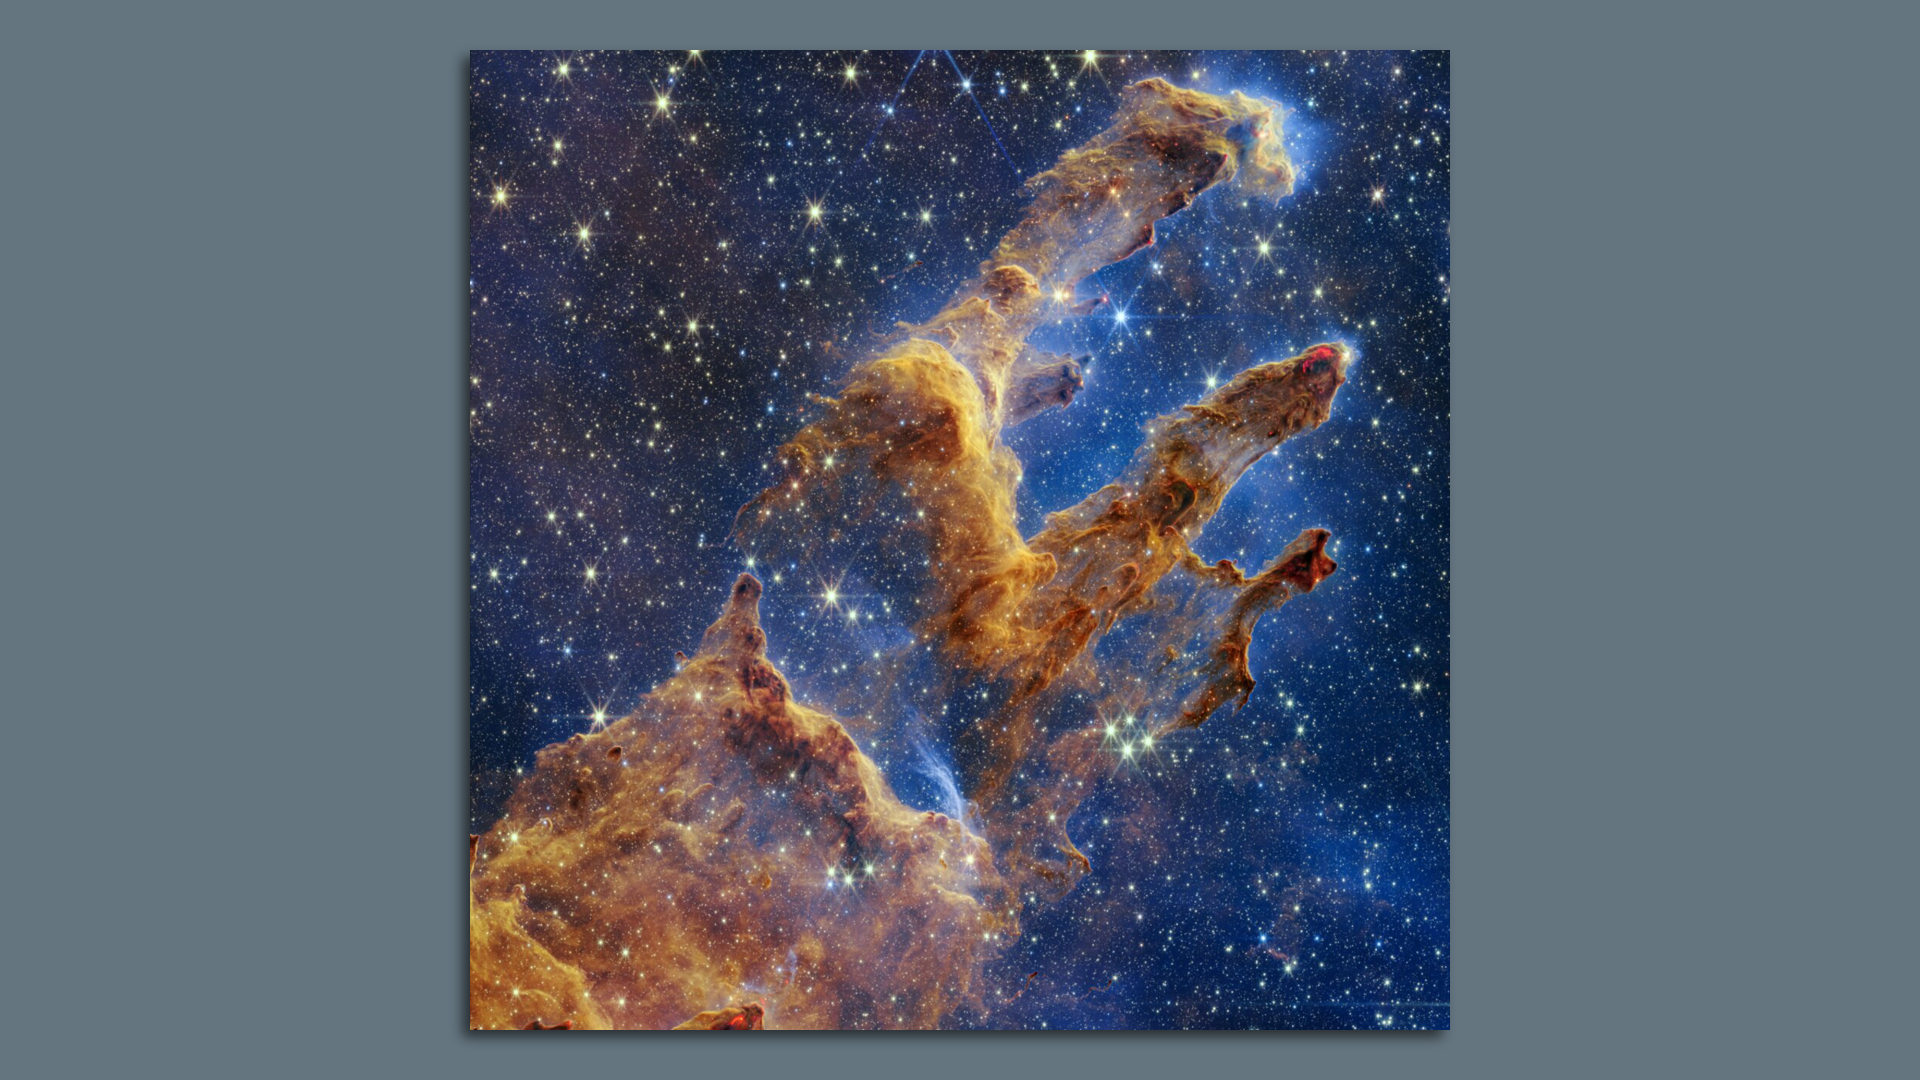 The NASA/ESA/CSA James Webb Space Telescope has captured a lush, highly detailed landscape – the iconic Pillars of Creation – where new stars are forming within dense clouds of gas and dust.